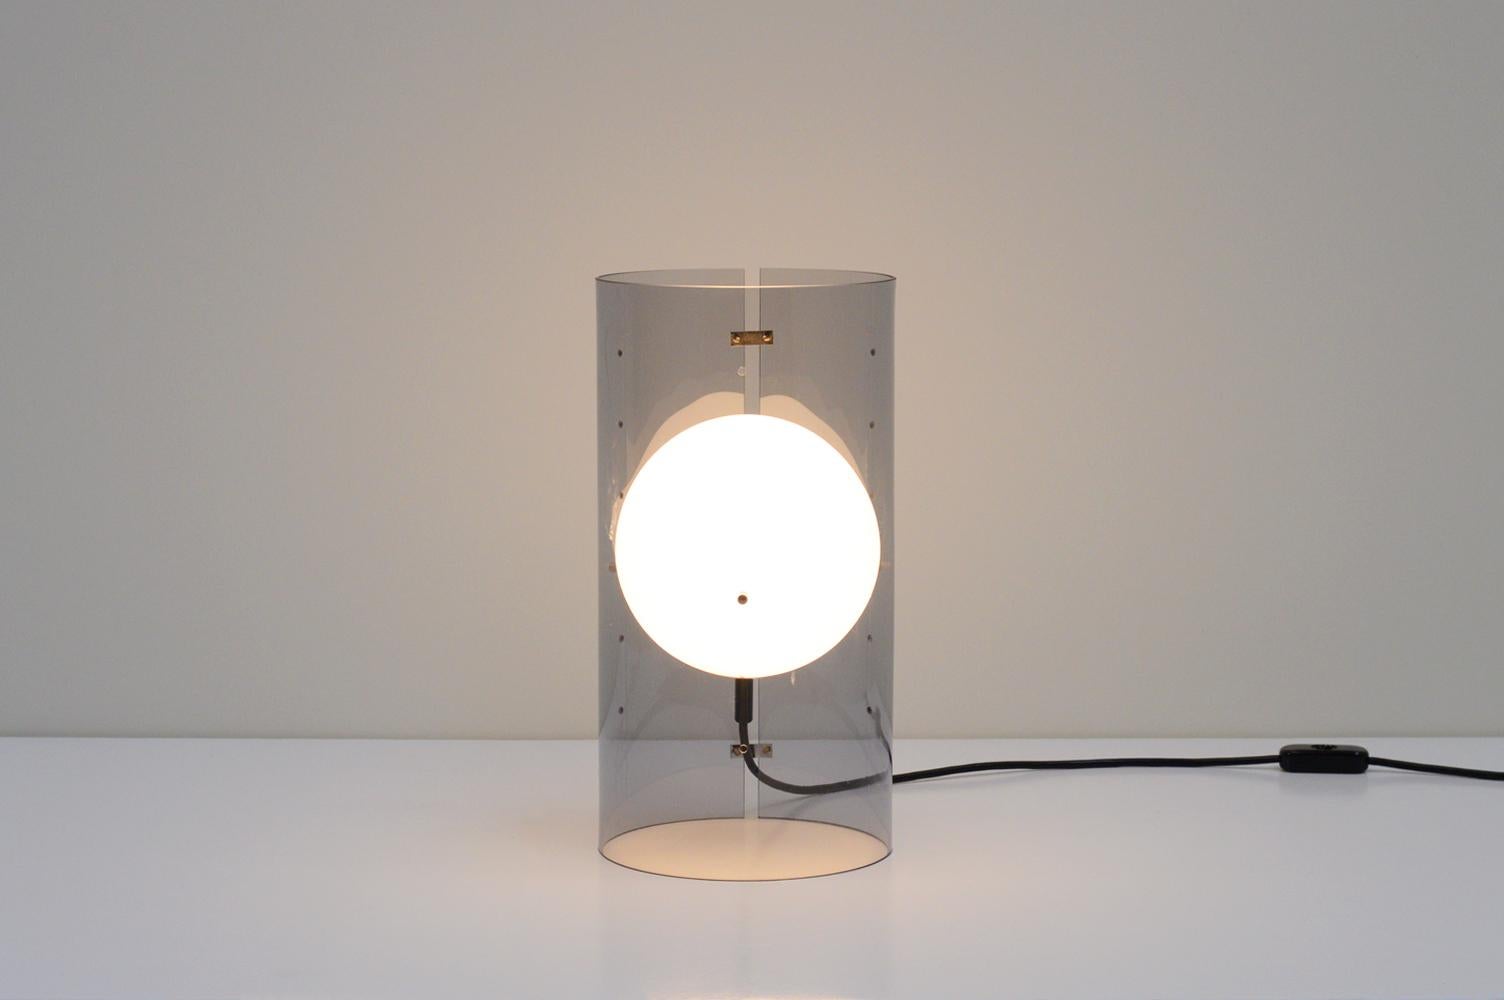 Mid-Century Modern Very rare table lamp by Raak Amsterdam, 70s The Netherlands.